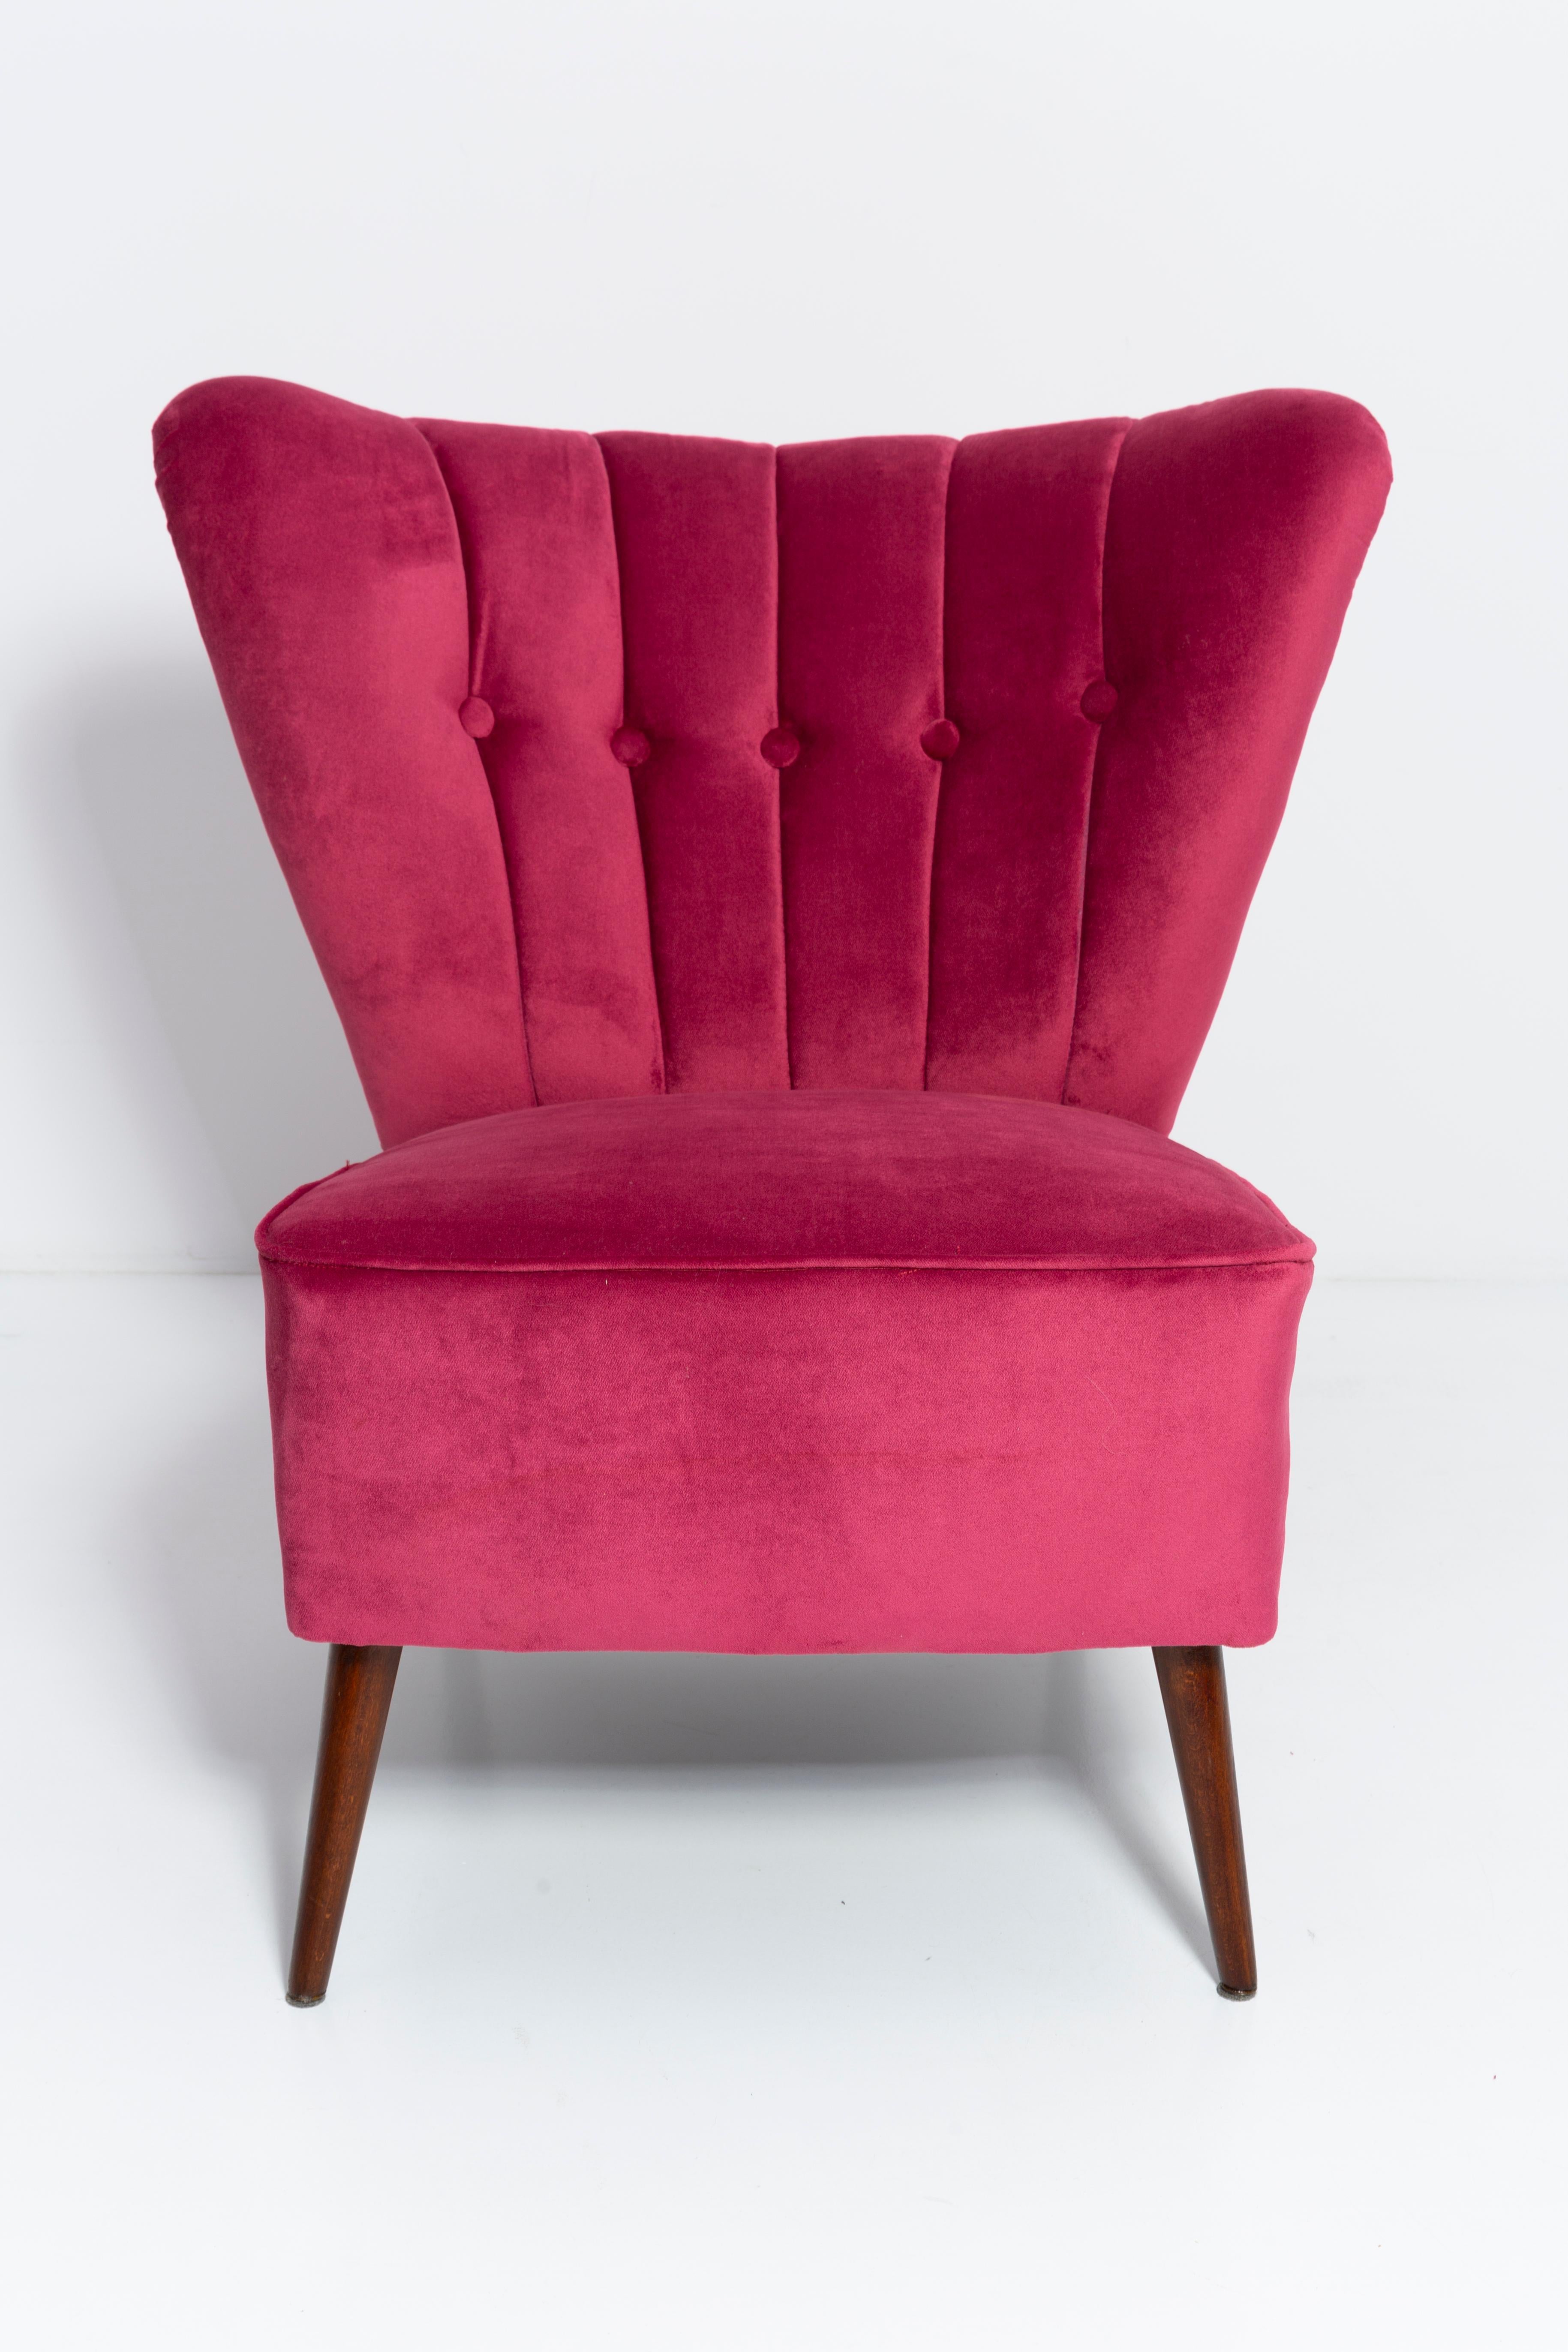 20th Century Set of Two Midcentury Magenta Pink Velvet Club Armchairs, Europe, 1960s For Sale